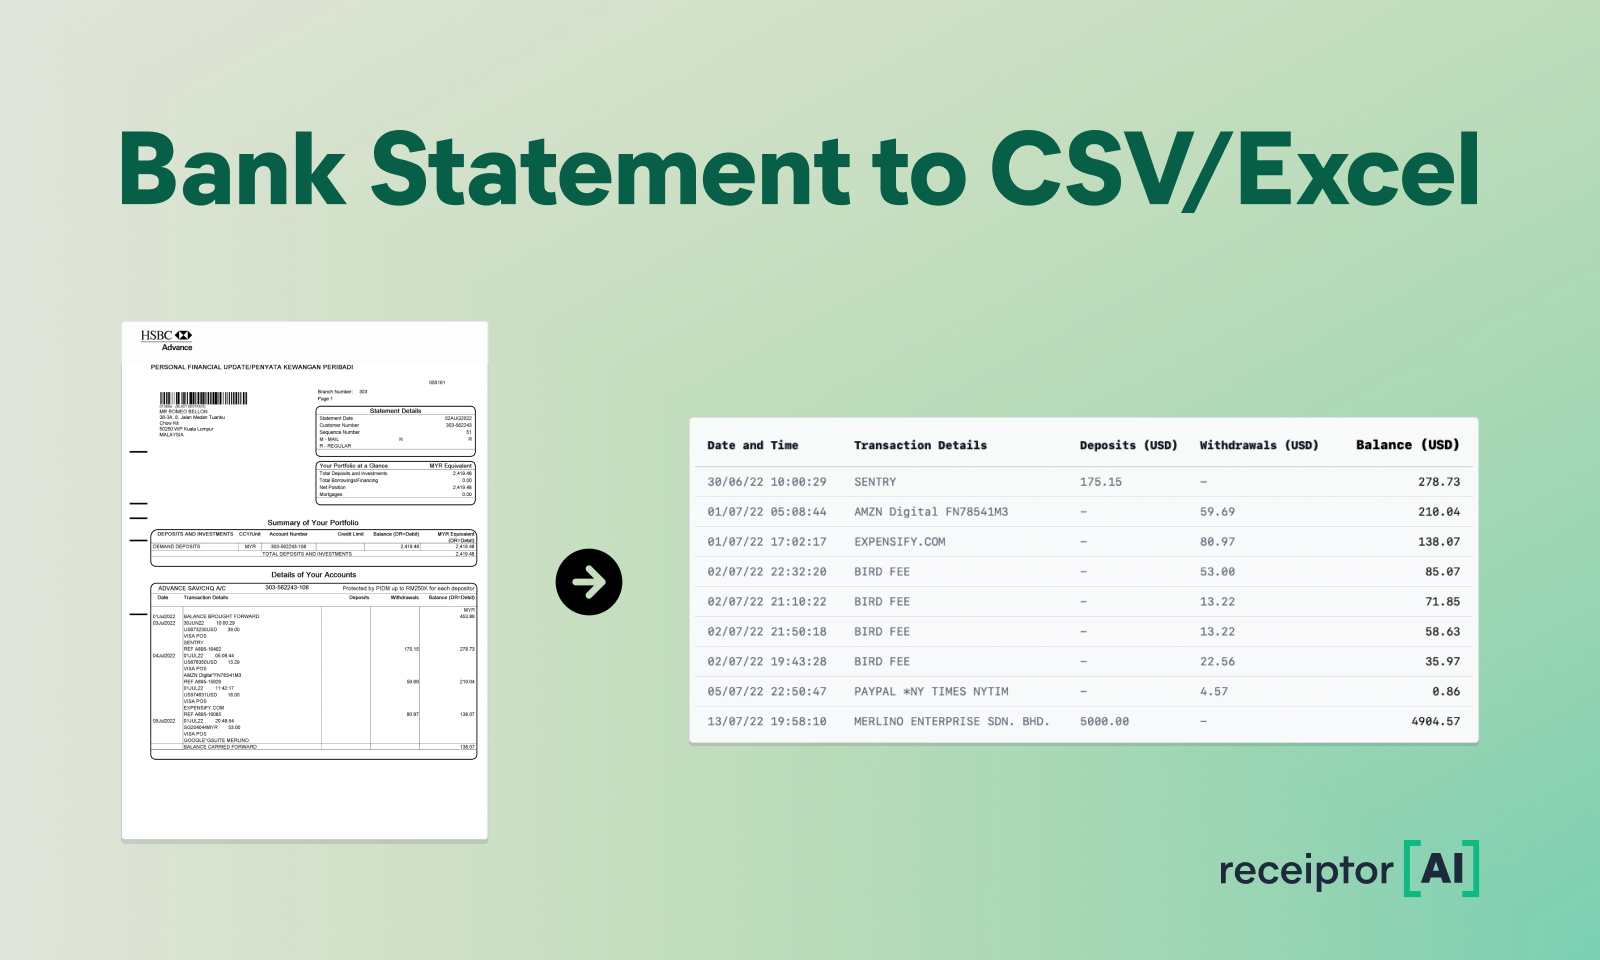 Bank Statement to CSV/Excel